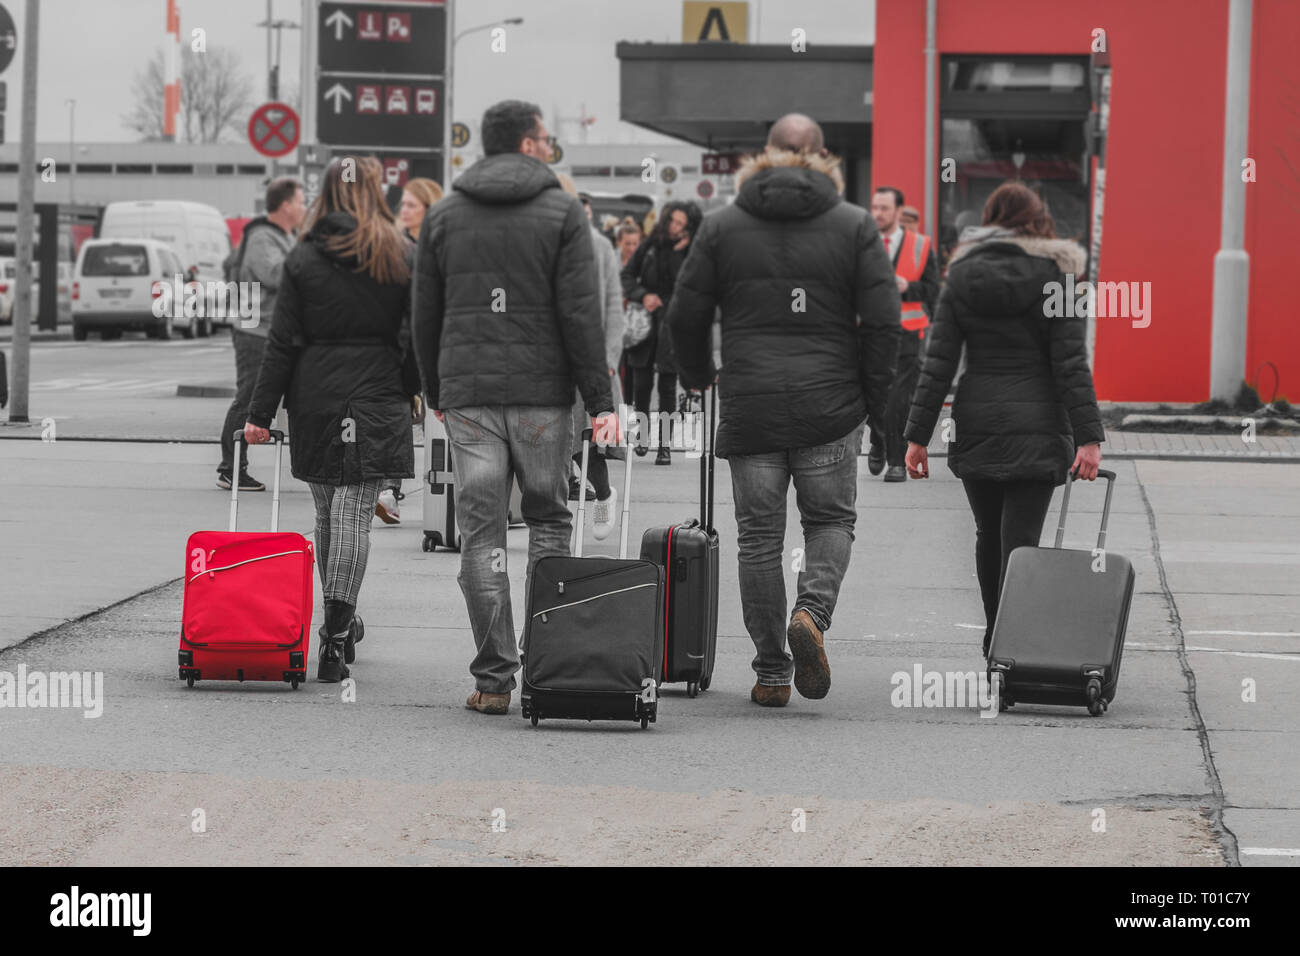 Berlin, Germany - march 2019: People with luggage walking at airport, travel concept - Stock Photo